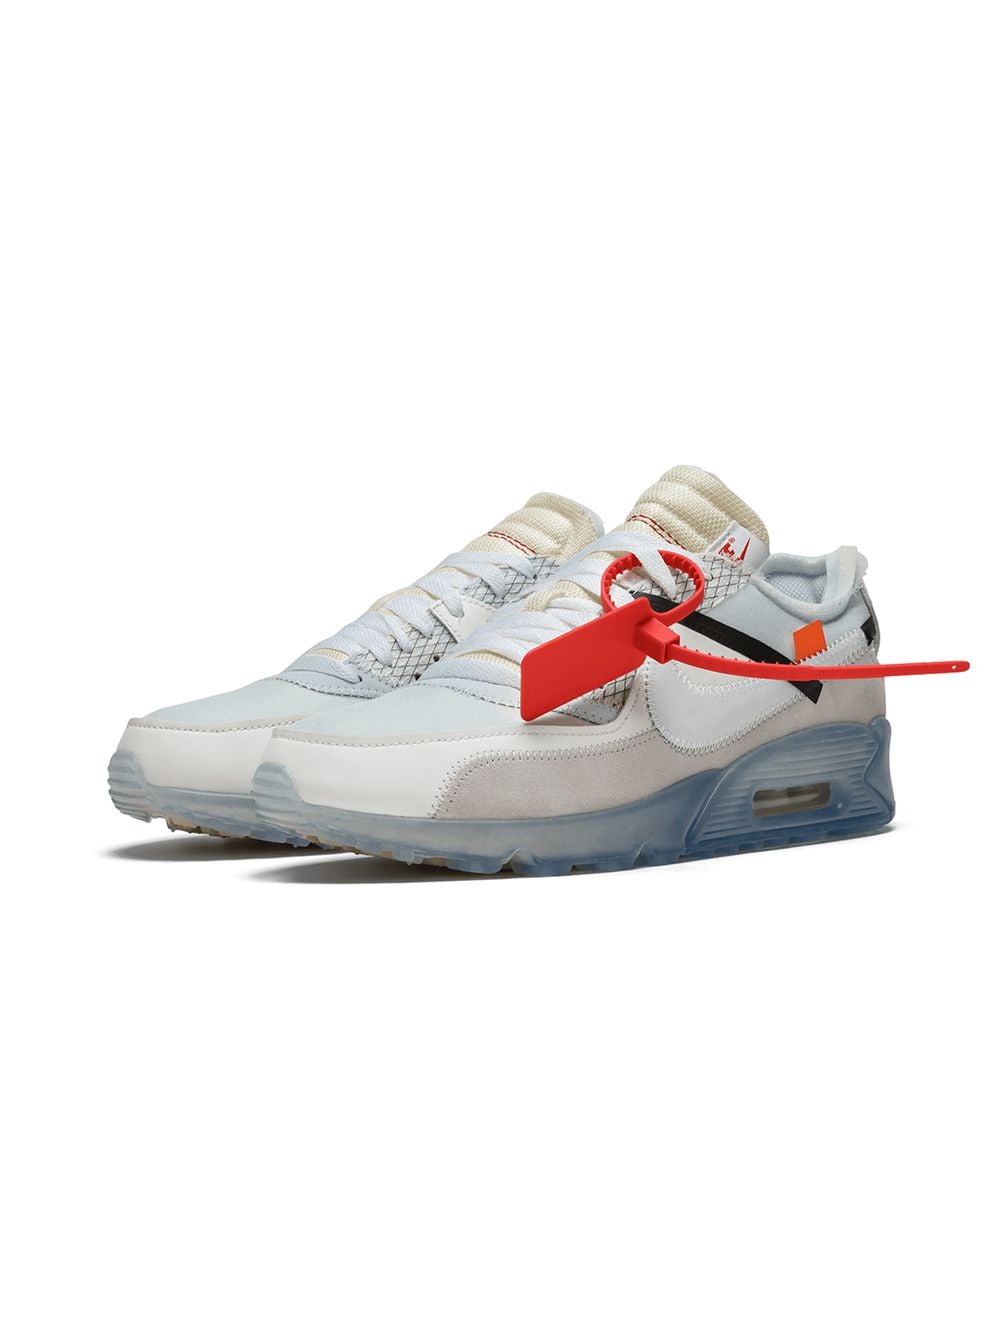 Nike X Off-White The 10 Air Max 90 Sneakers - Farfetch